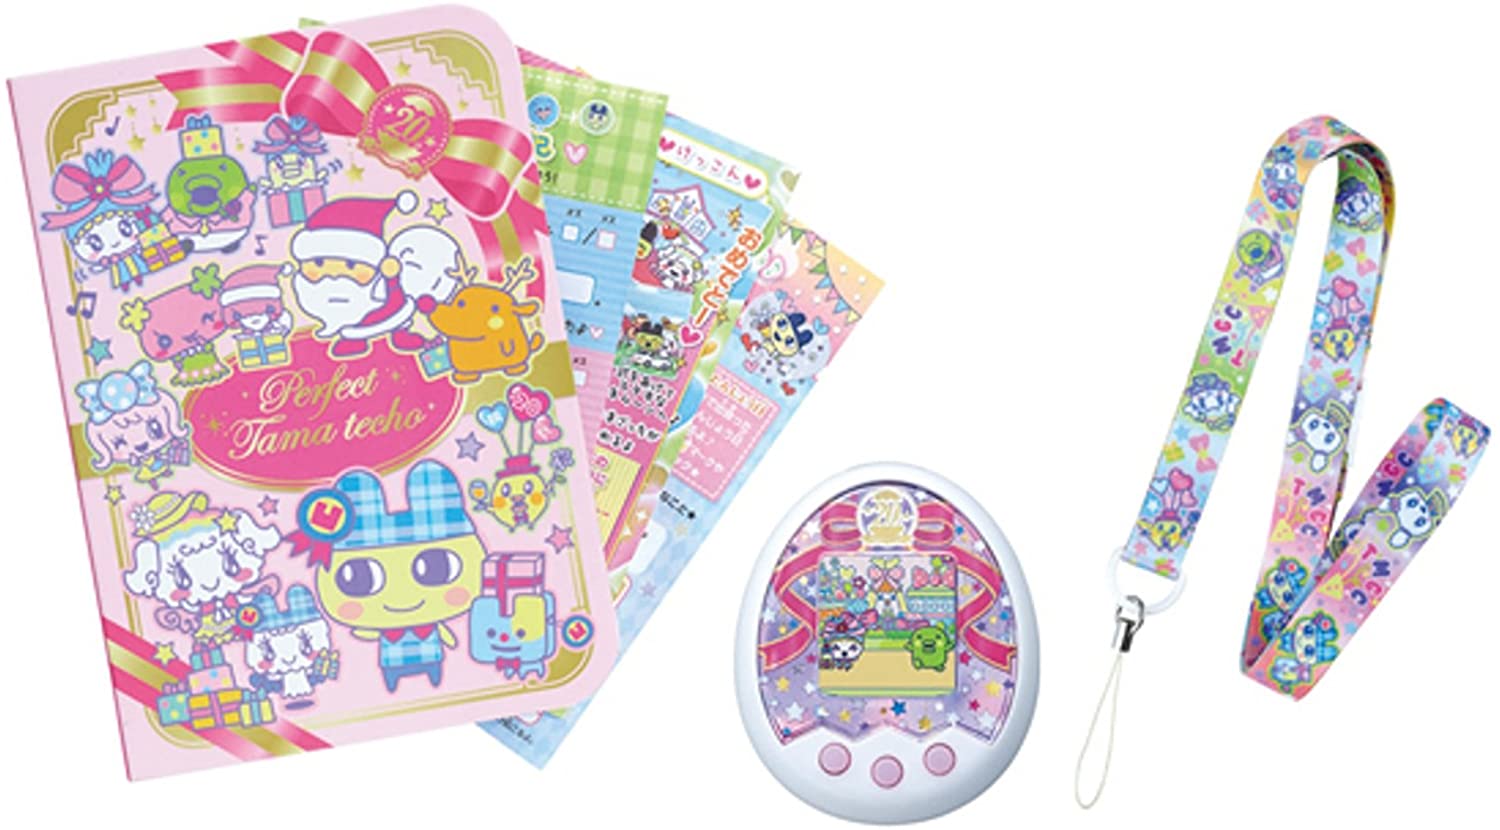 20th Anniversary Bandai Tamagotchi Mix Ver Royal White Japan IMPORT 2 Day Ship for sale online 